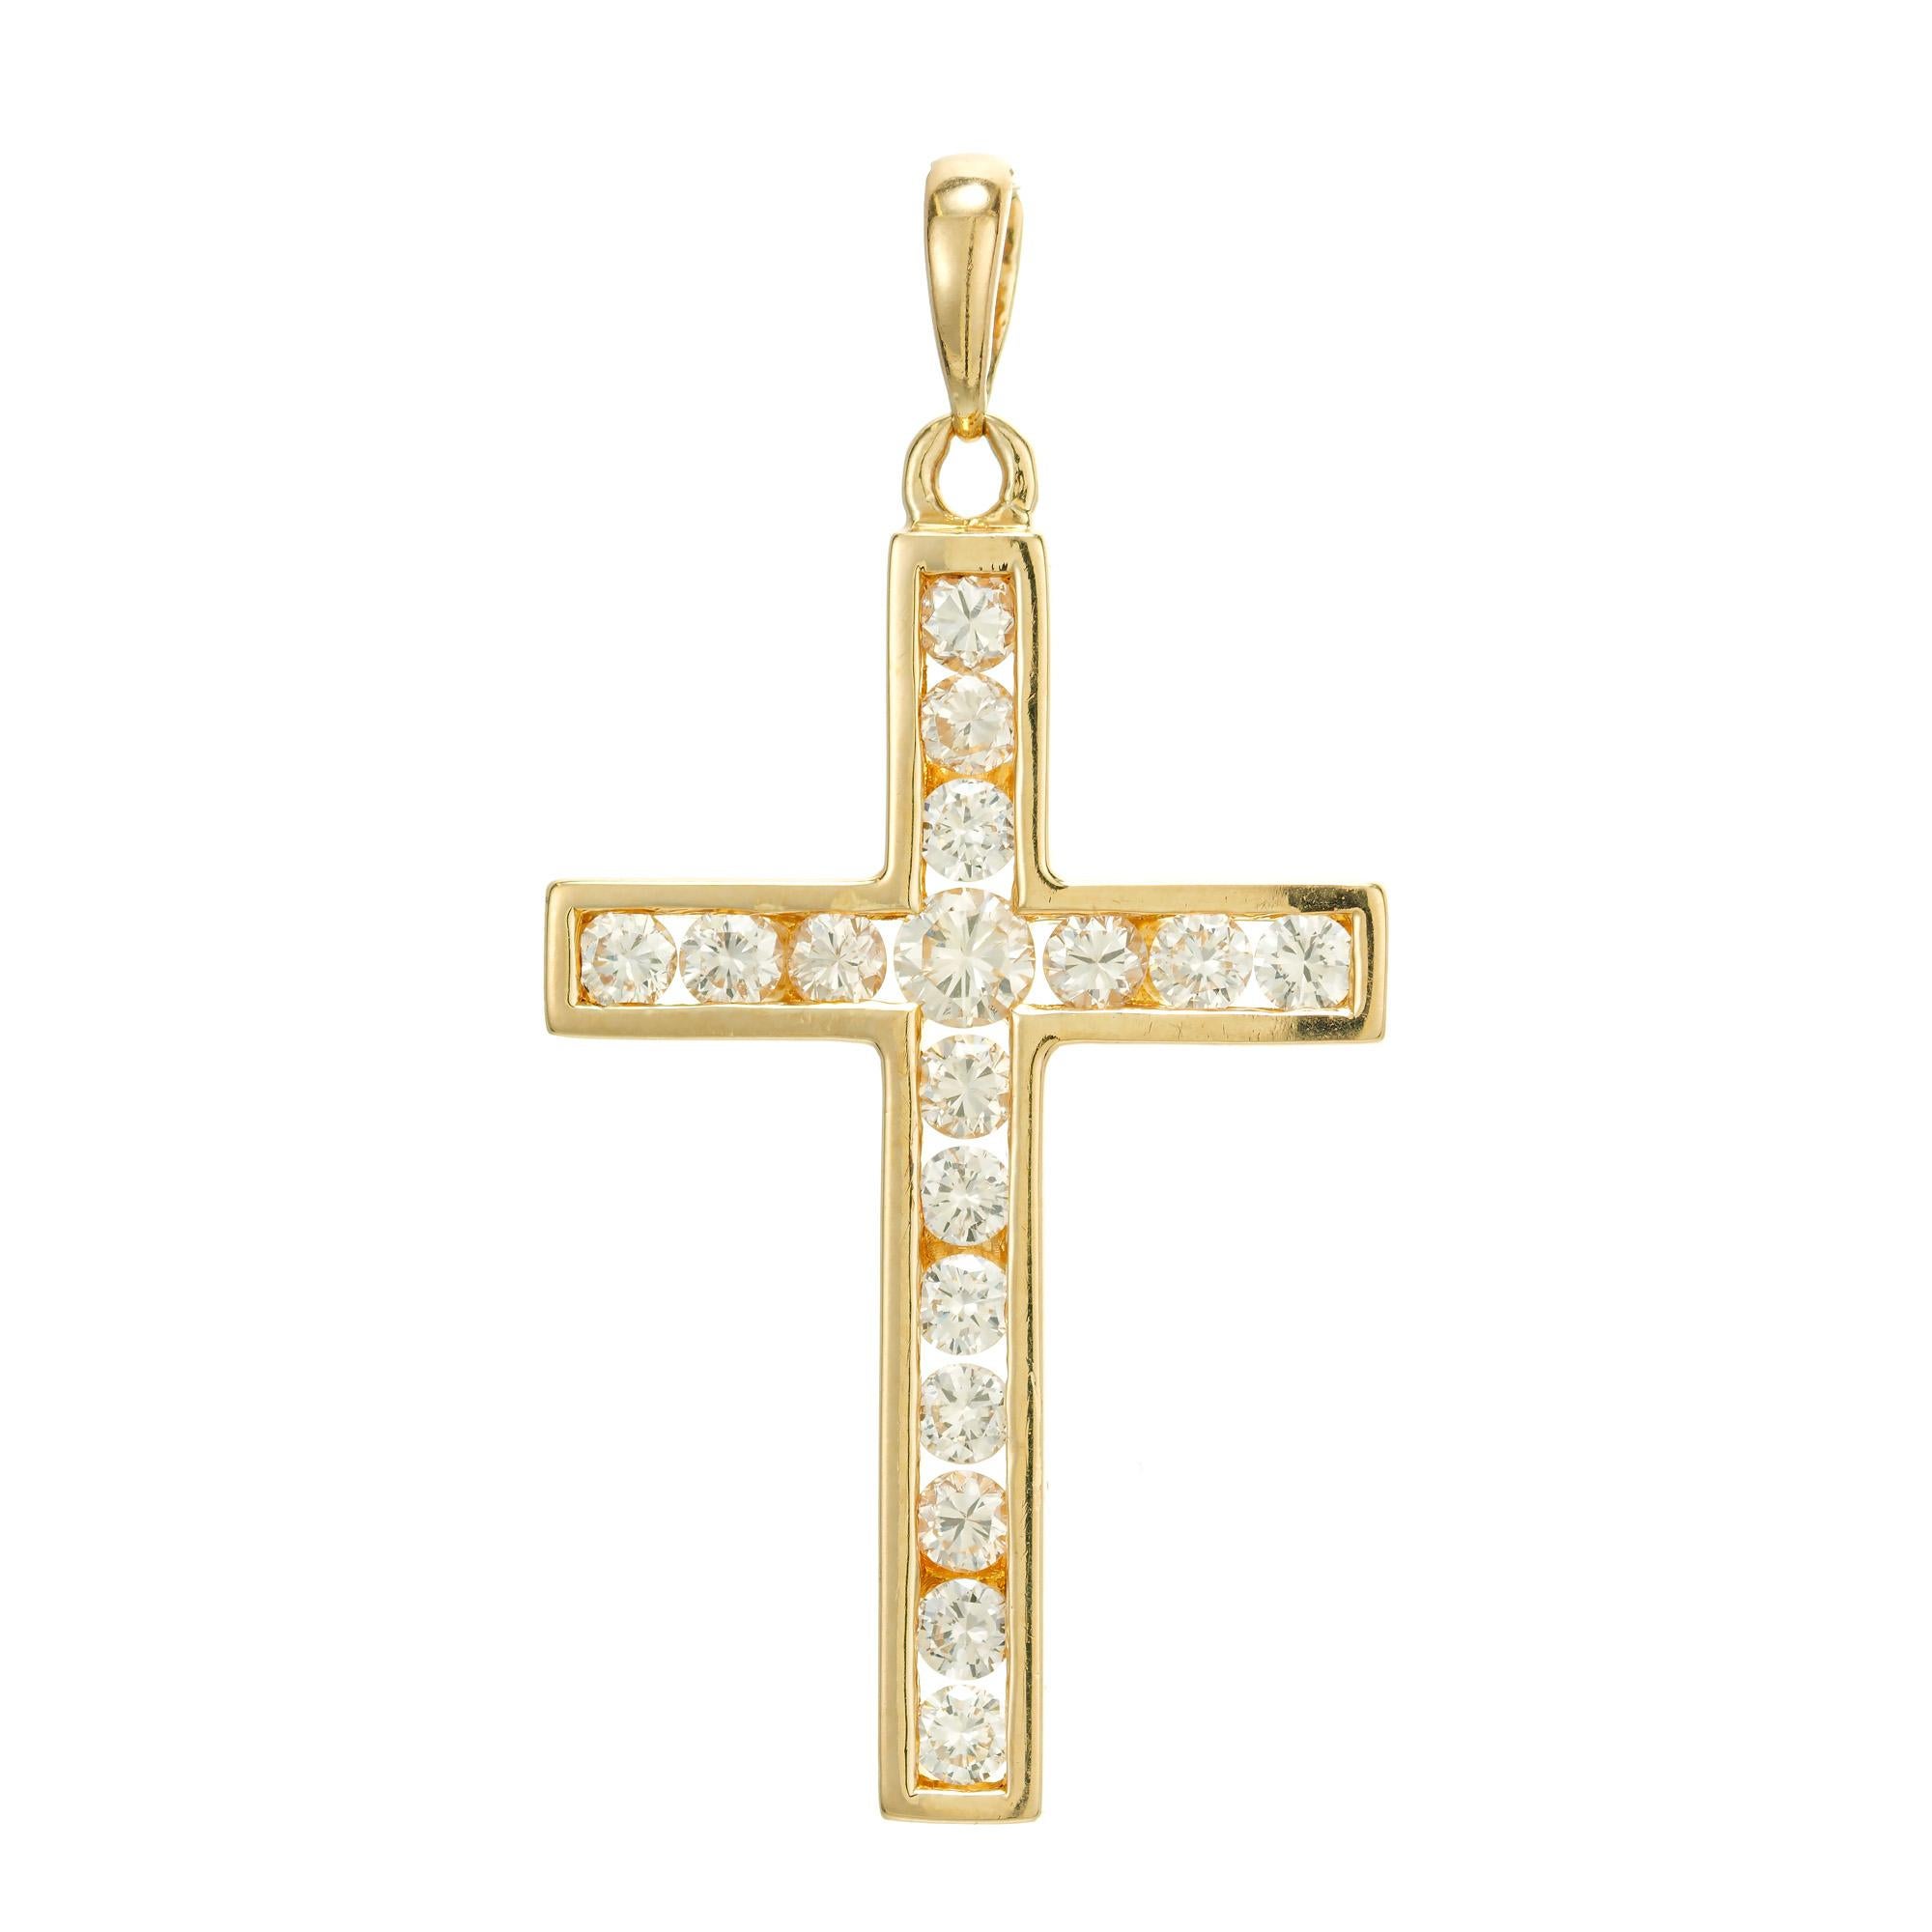 Open channel set cross with 17 round brilliant cut diamonds in 14k yellow gold.

17 round brilliant cut diamonds, I SI approx. .75cts
14k yellow gold 
Stamped: 14k
3.7 grams
Top to bottom: 39.2mm or  1.5 Inches
Width: 20.3mm or .80 Inches
Depth or